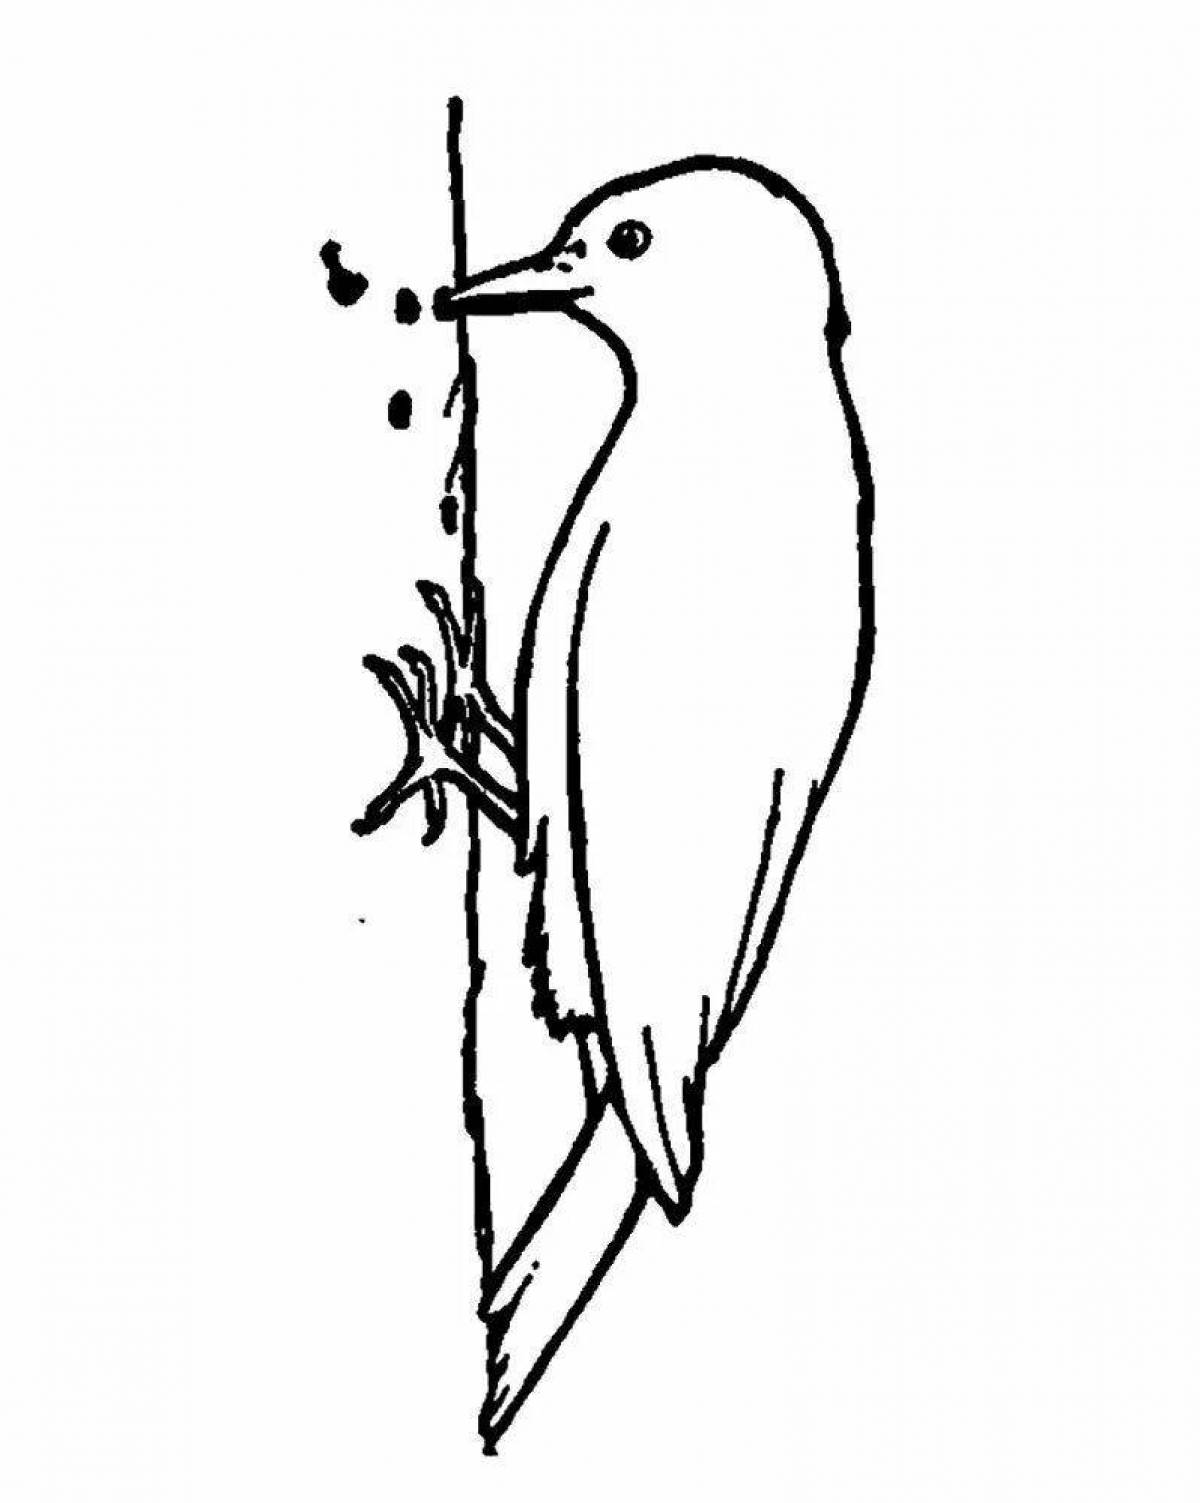 Coloring book figurine of a woodpecker